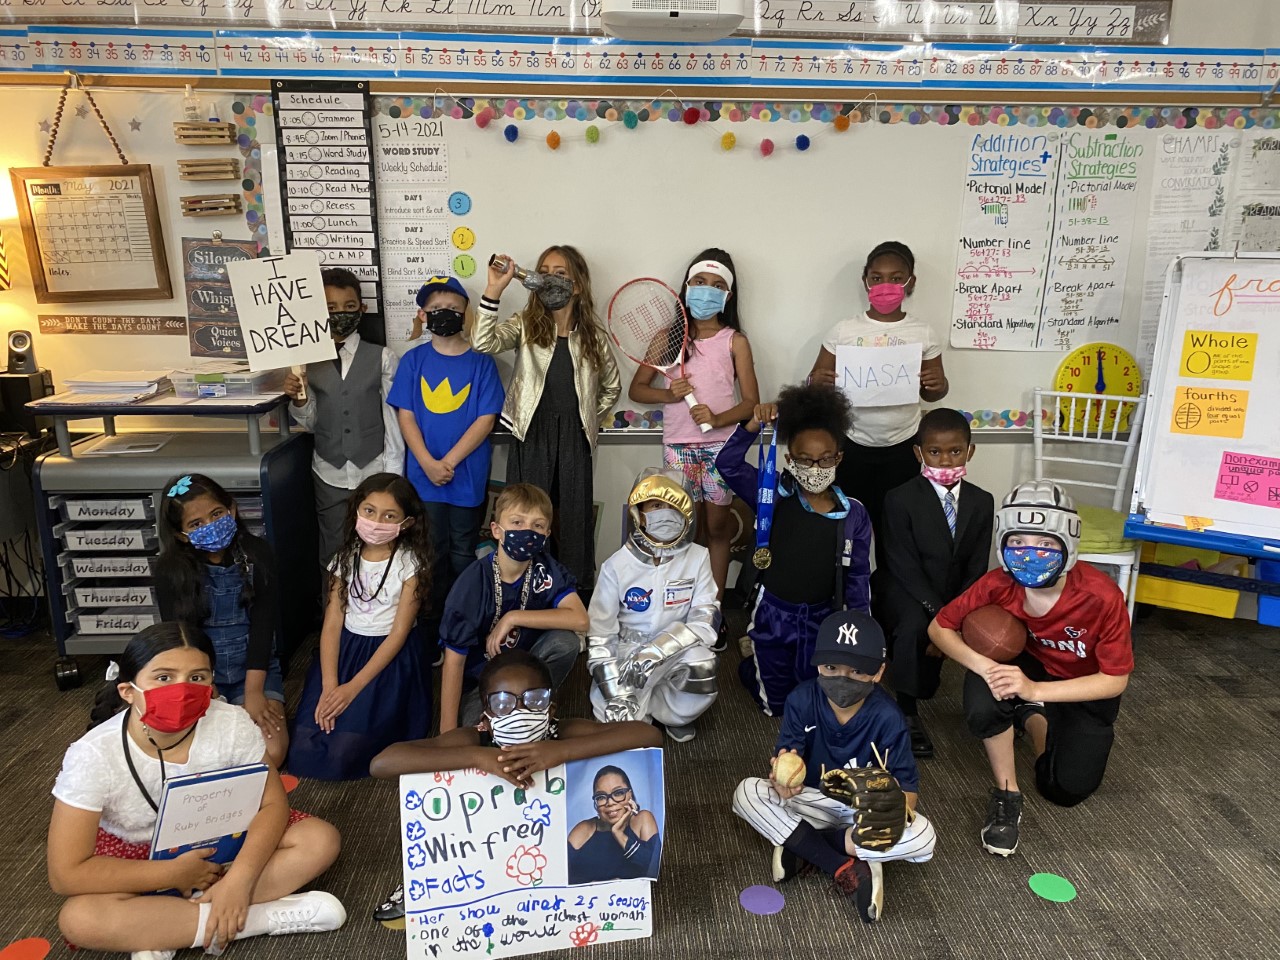 A group of students smile for the camera while dressed up in costumes.